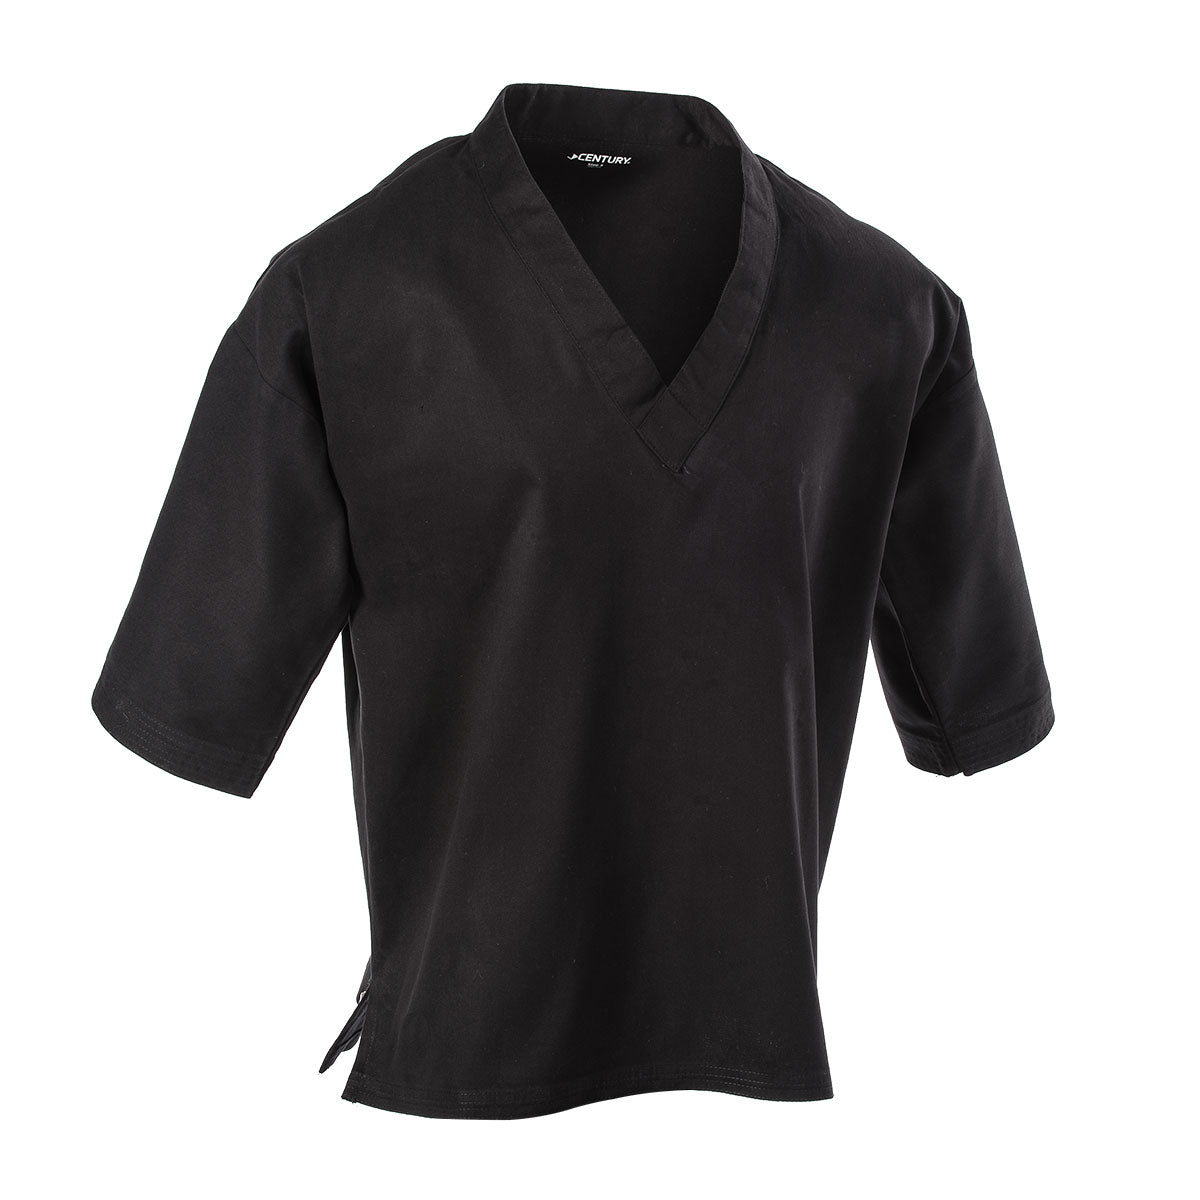 8 oz. Middleweight Brushed Cotton Pullover Top Black